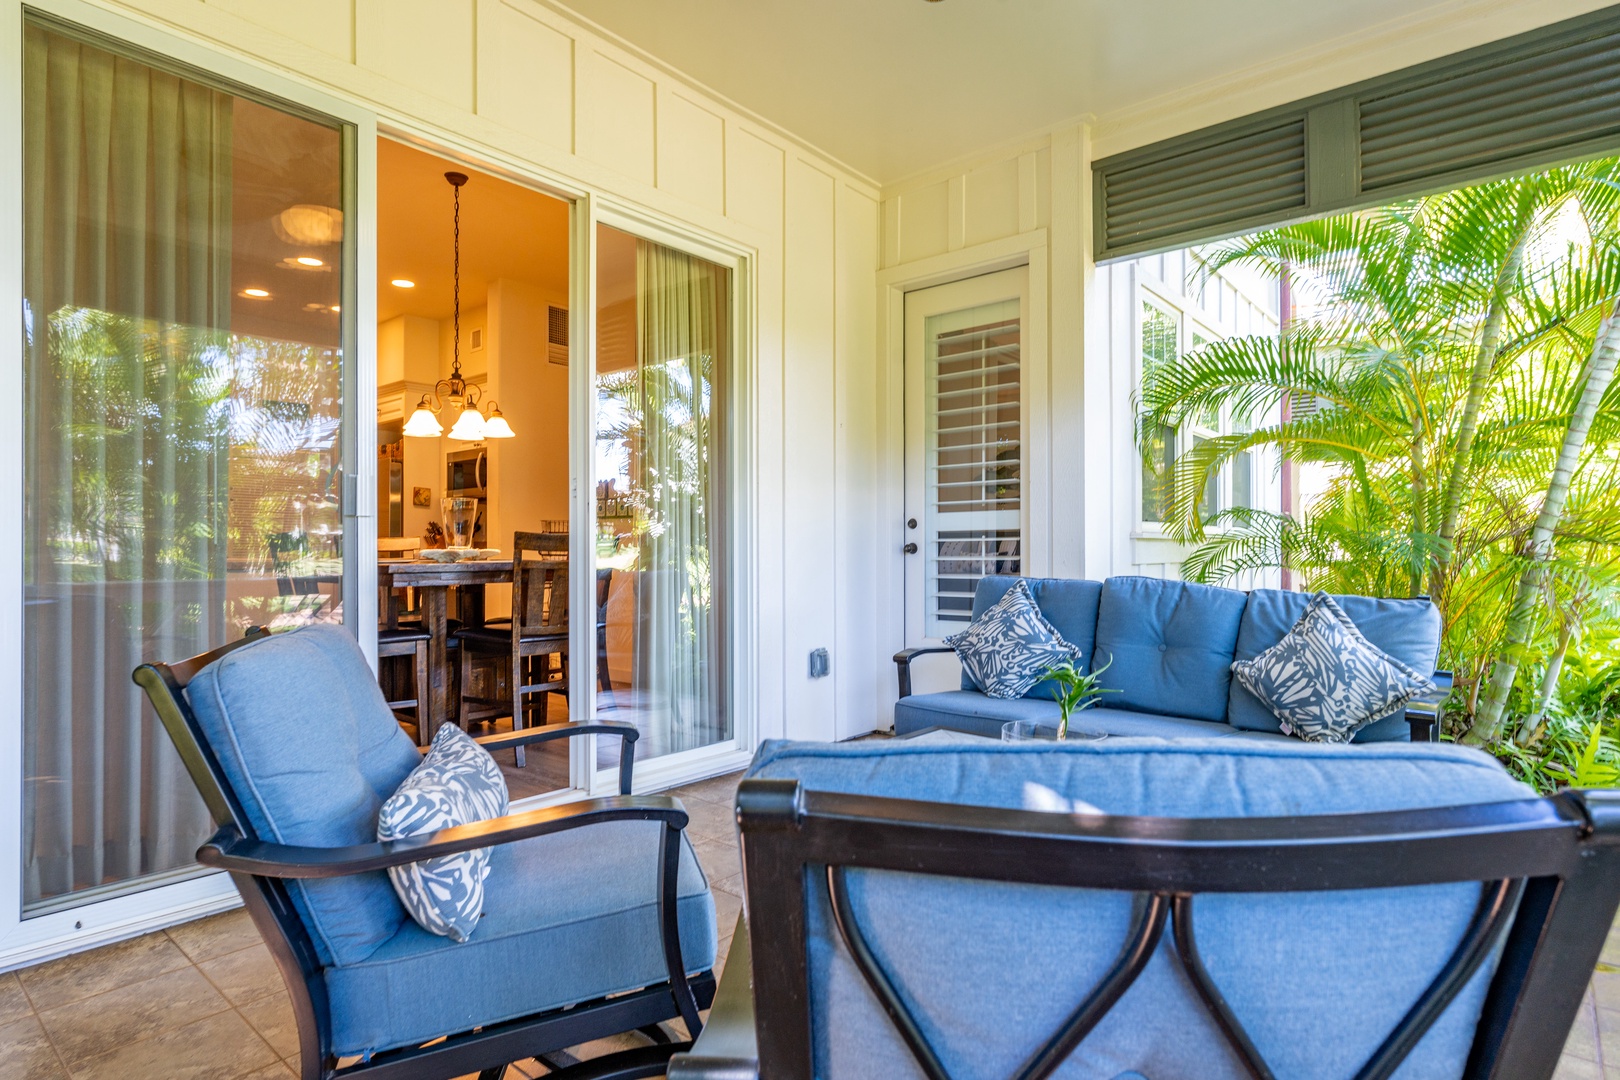 Kapolei Vacation Rentals, Coconut Plantation 1208-2 - Take in the island breezes and lush greenery on the lanai.